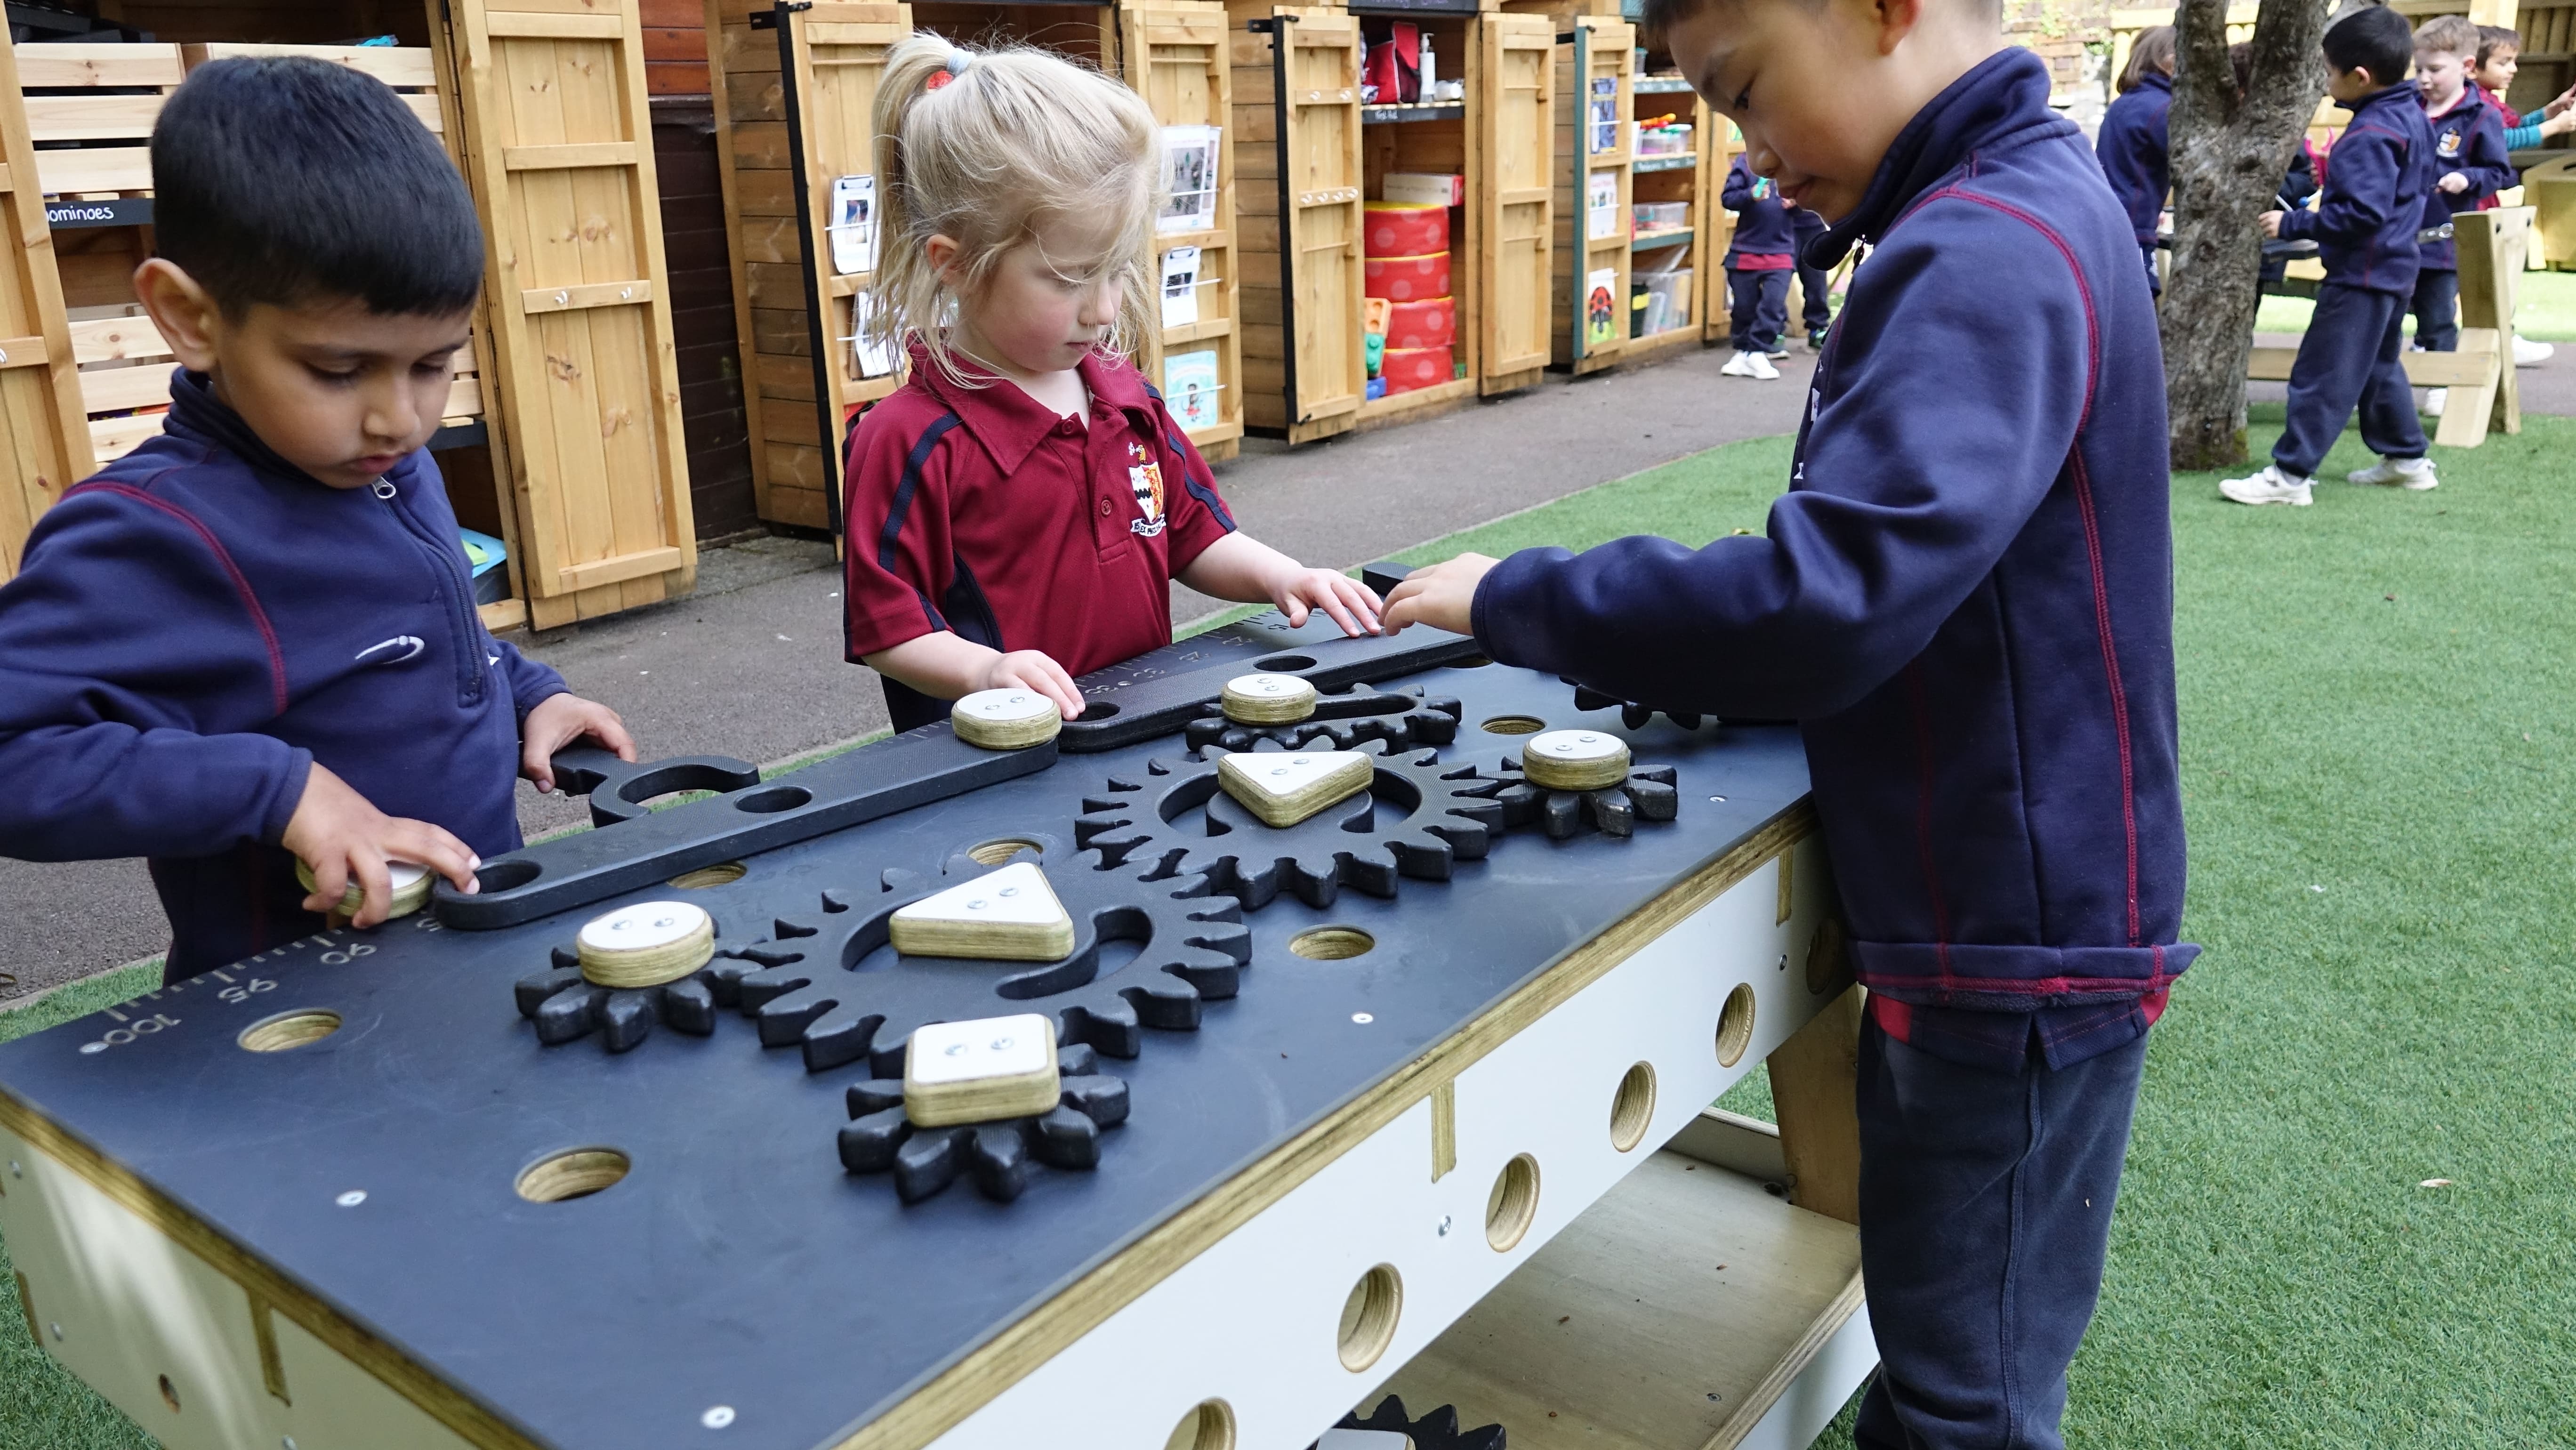 3 children are playing with a wooden table, with a black top and wooden cogs attached to it. The children are moving pieces around on the table to make it flow well.